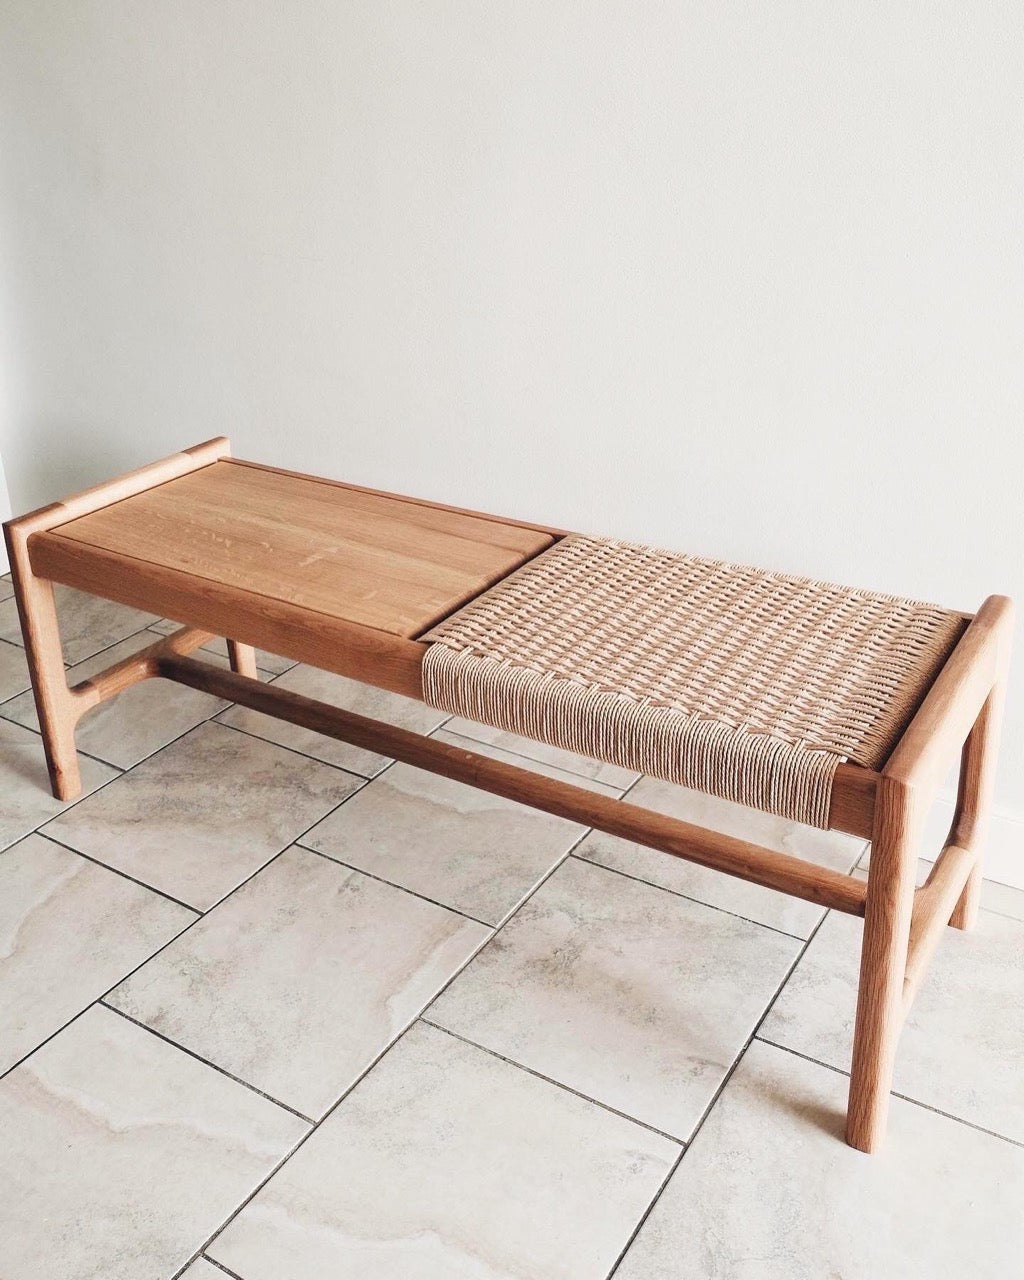 Build Plans, Danish Papercord bench side angle